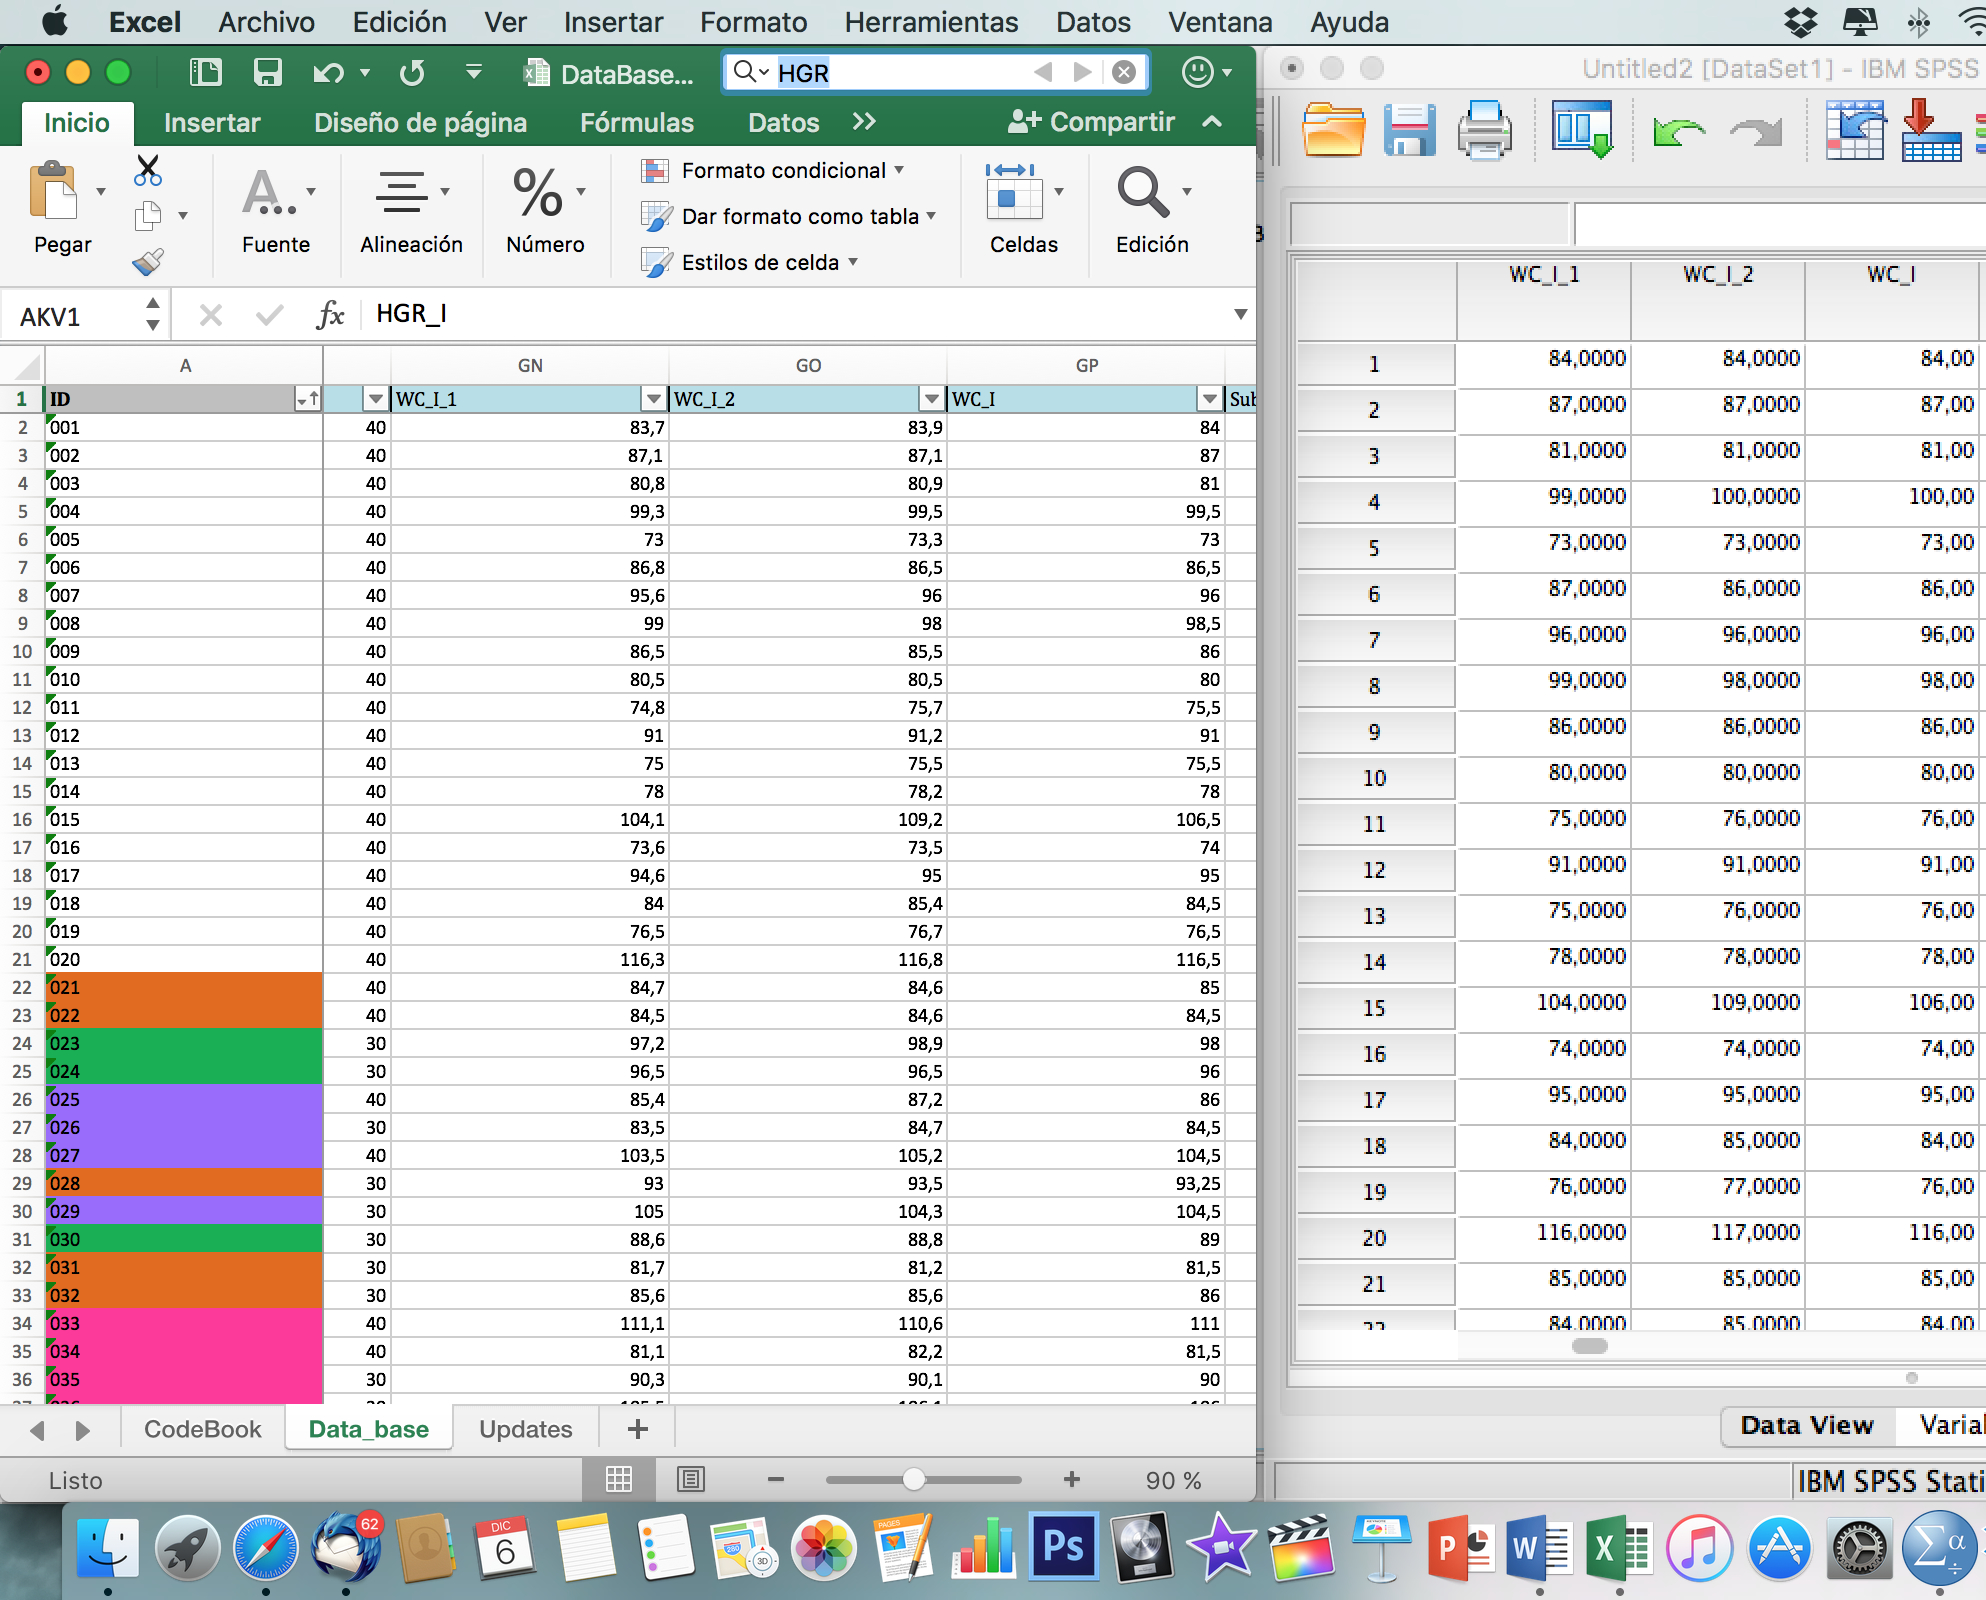 Spss Spreadsheet within Hi! I Have A Problem When Importing Data From Excel To Spss. The